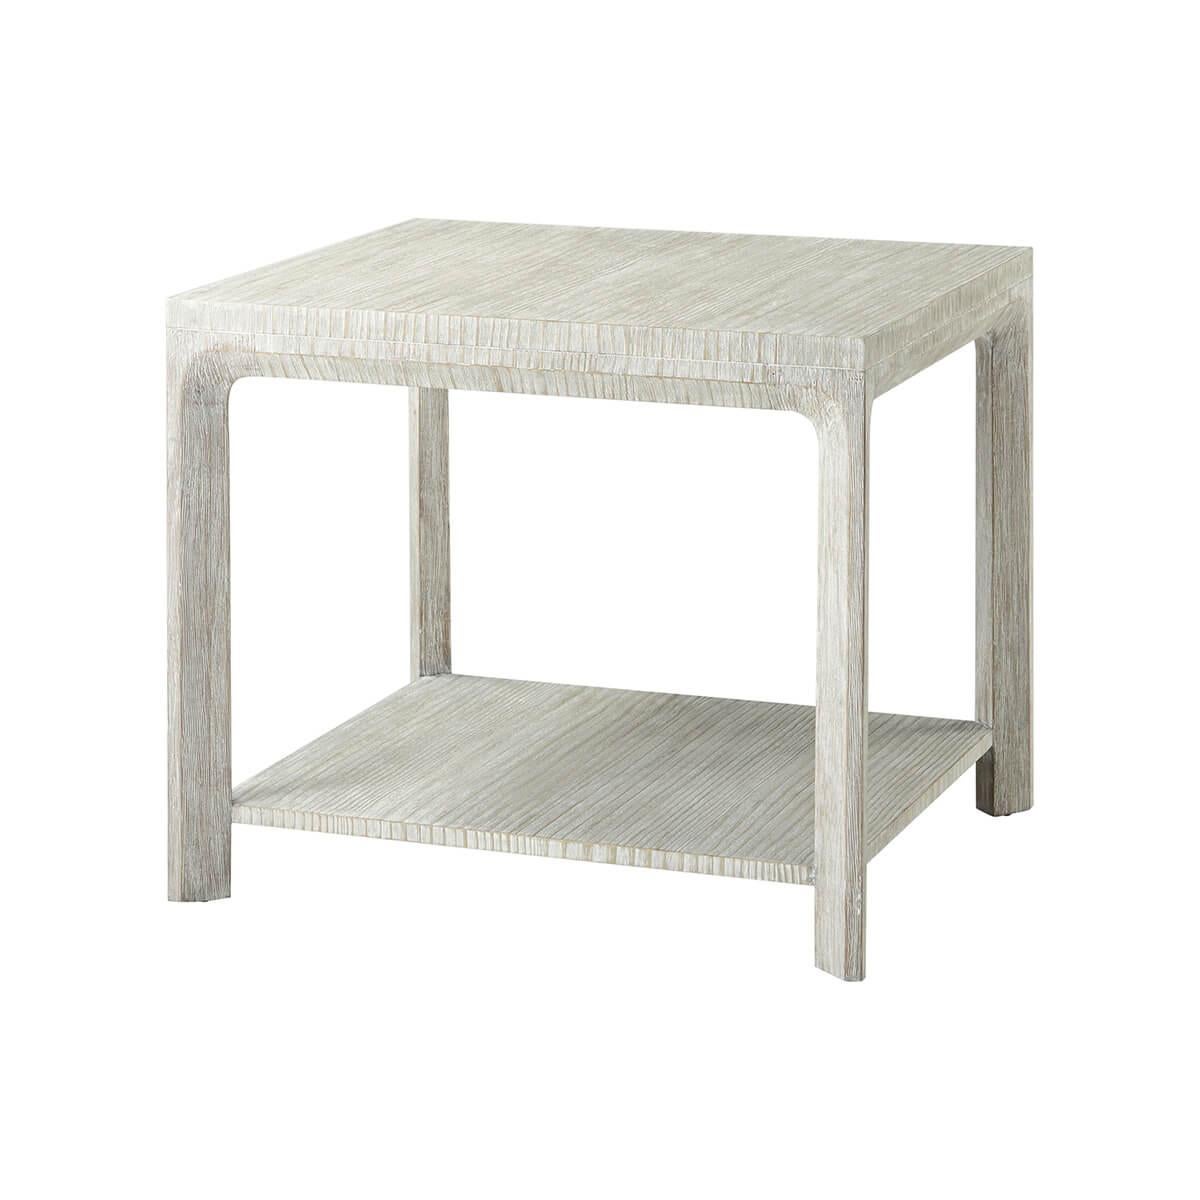 A four-legged wire-brushed cerused pine side table is supported by a bevel-shaped cross section and seen here in our Sea Salt finish.

Dimensions: 24